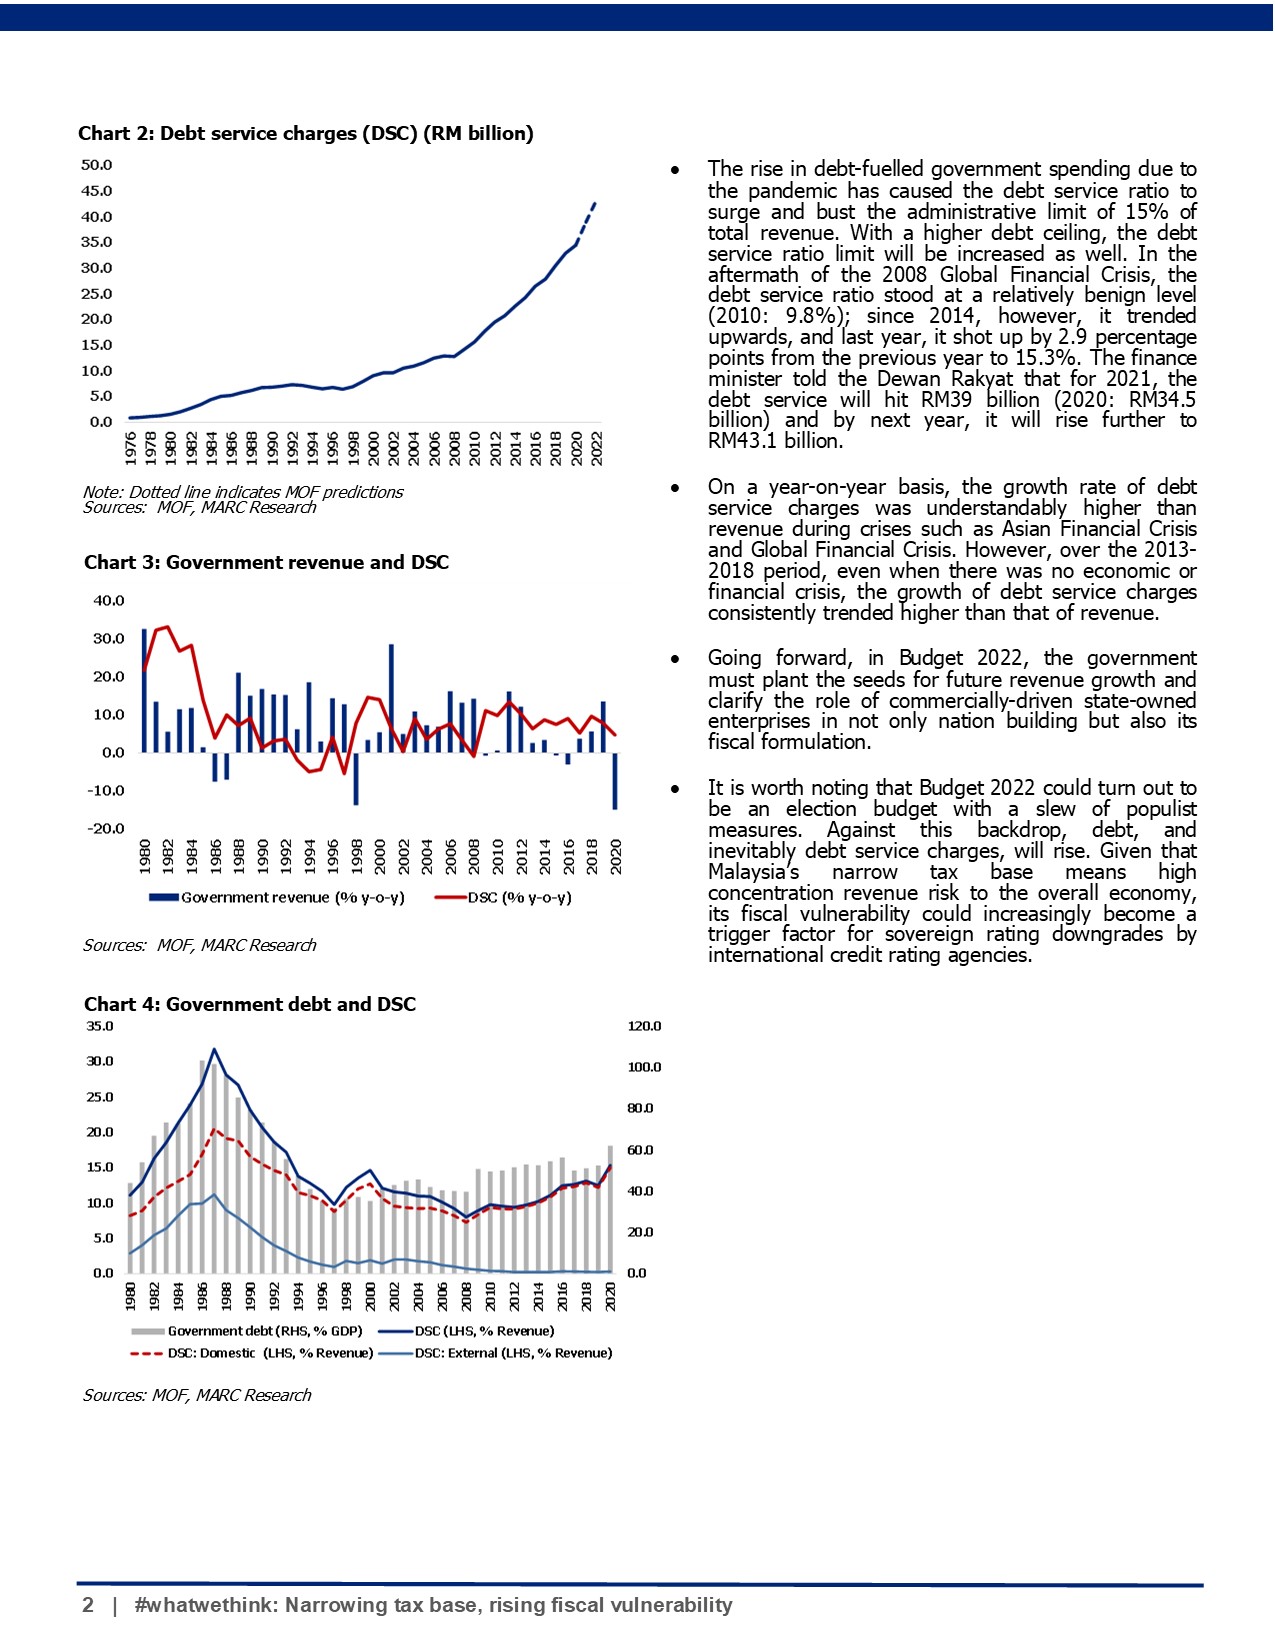 20211028 - Narrowing tax base rising fiscal vulnerability Page 2